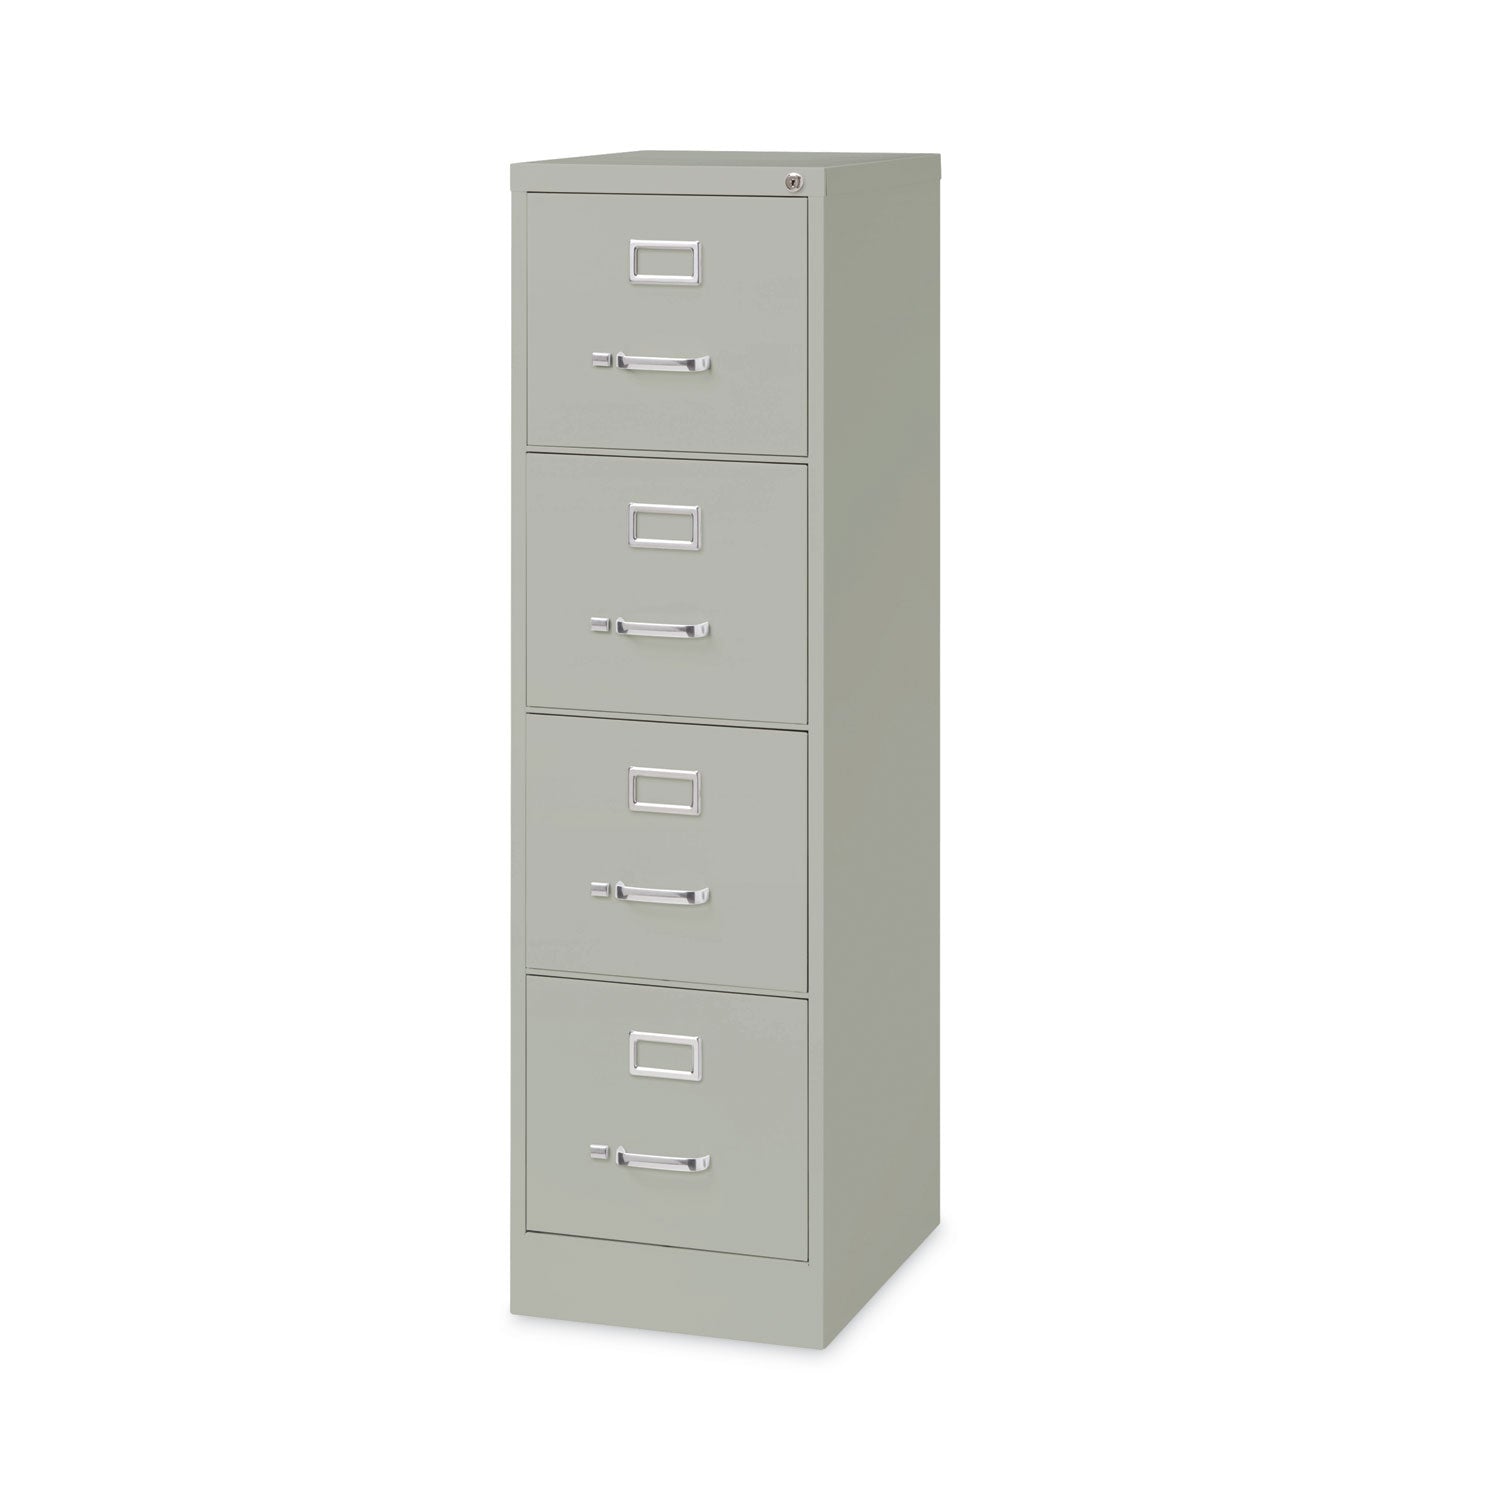 vertical-letter-file-cabinet-4-letter-size-file-drawers-light-gray-15-x-22-x-52_hid22733 - 2